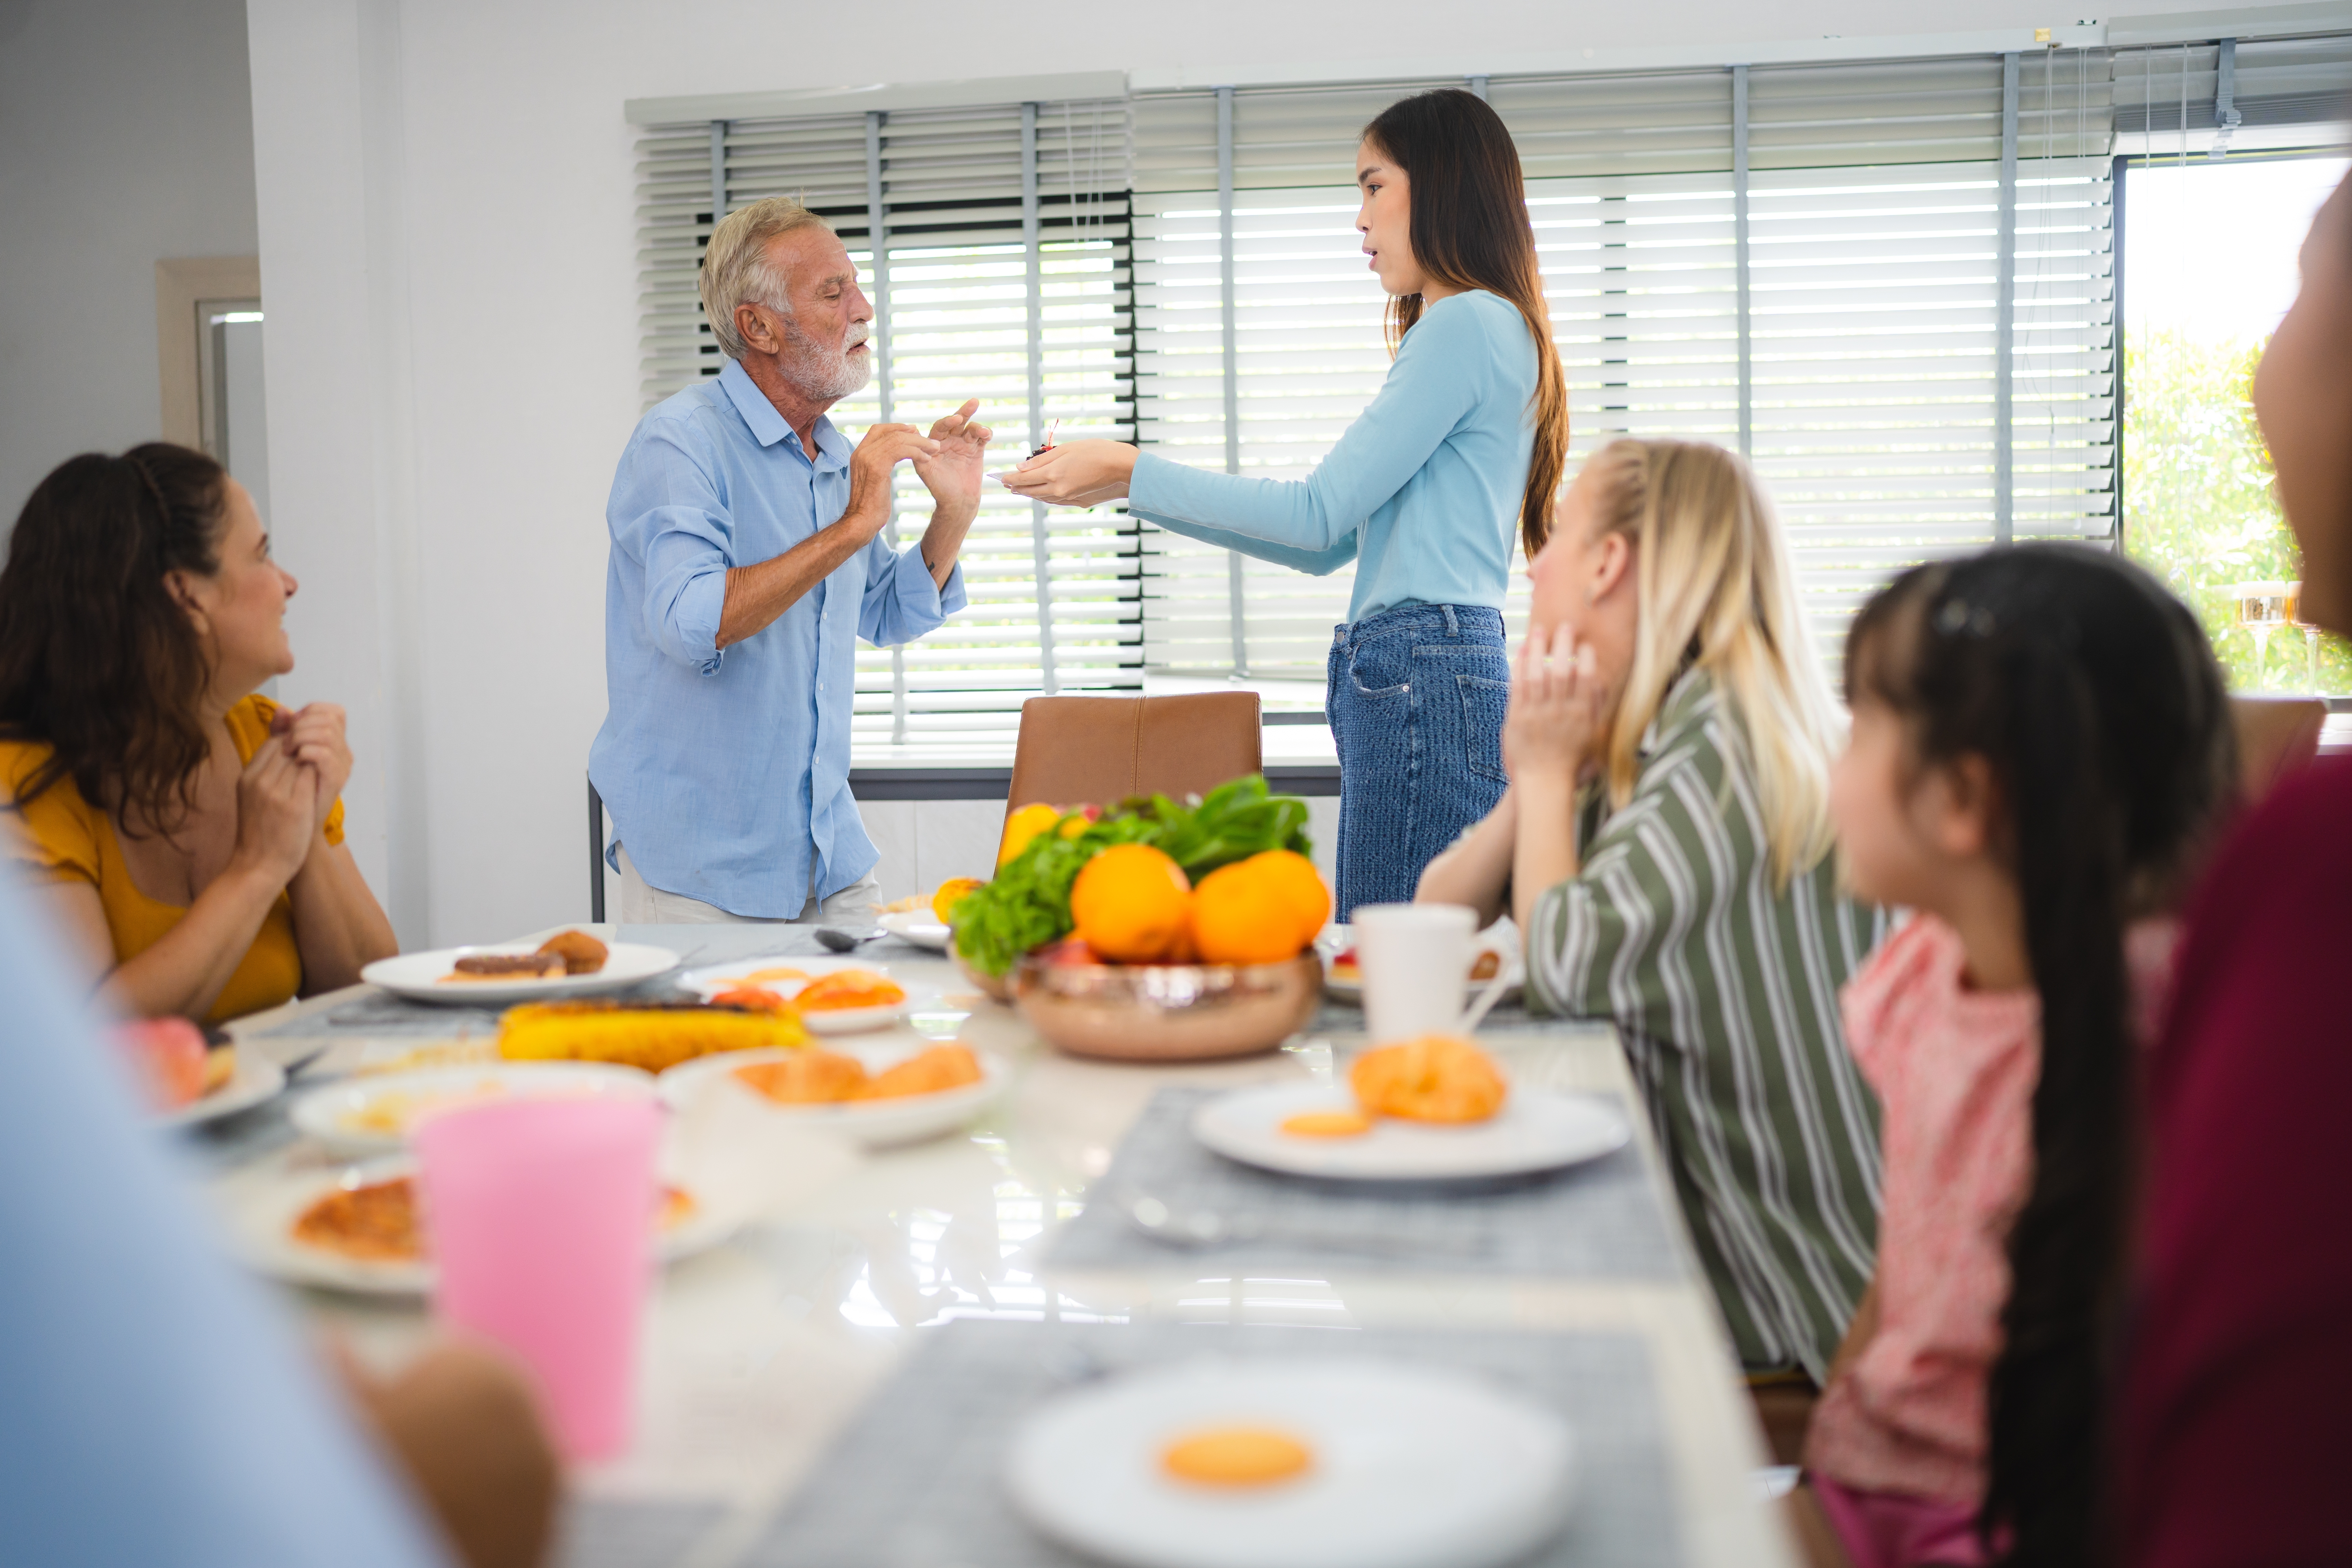 A senior man talking to a young girl during family dinner in the dining room | Source: Shutterstock